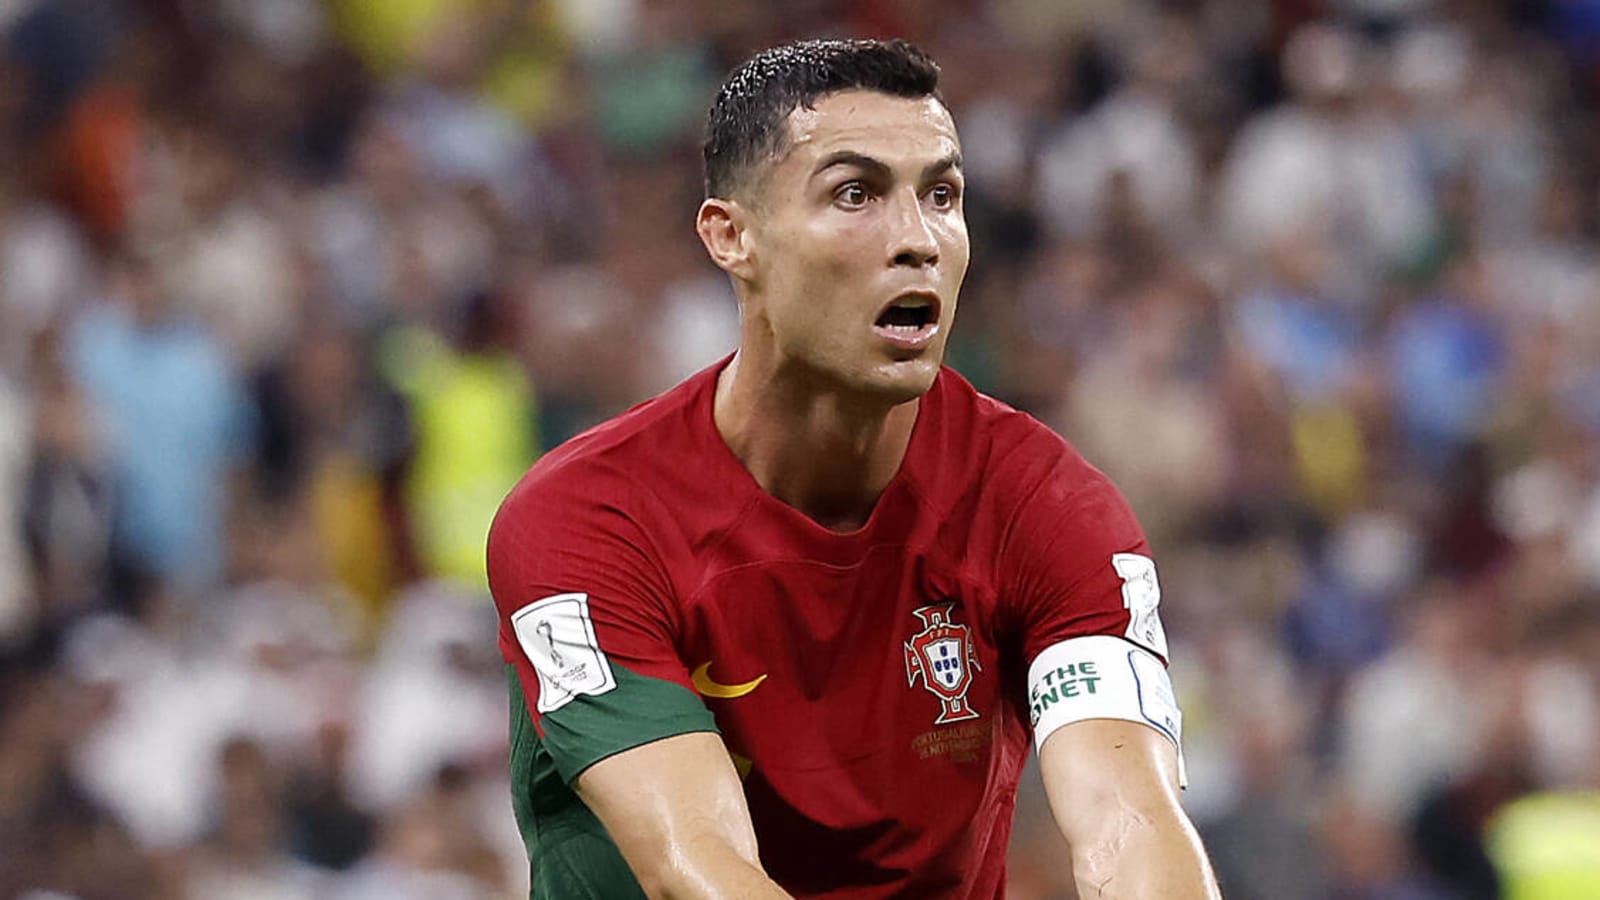 Cristiano Ronaldo, Lionel Messi dominate the Forbes list of highest-paid athletes despite being at the end of their careers